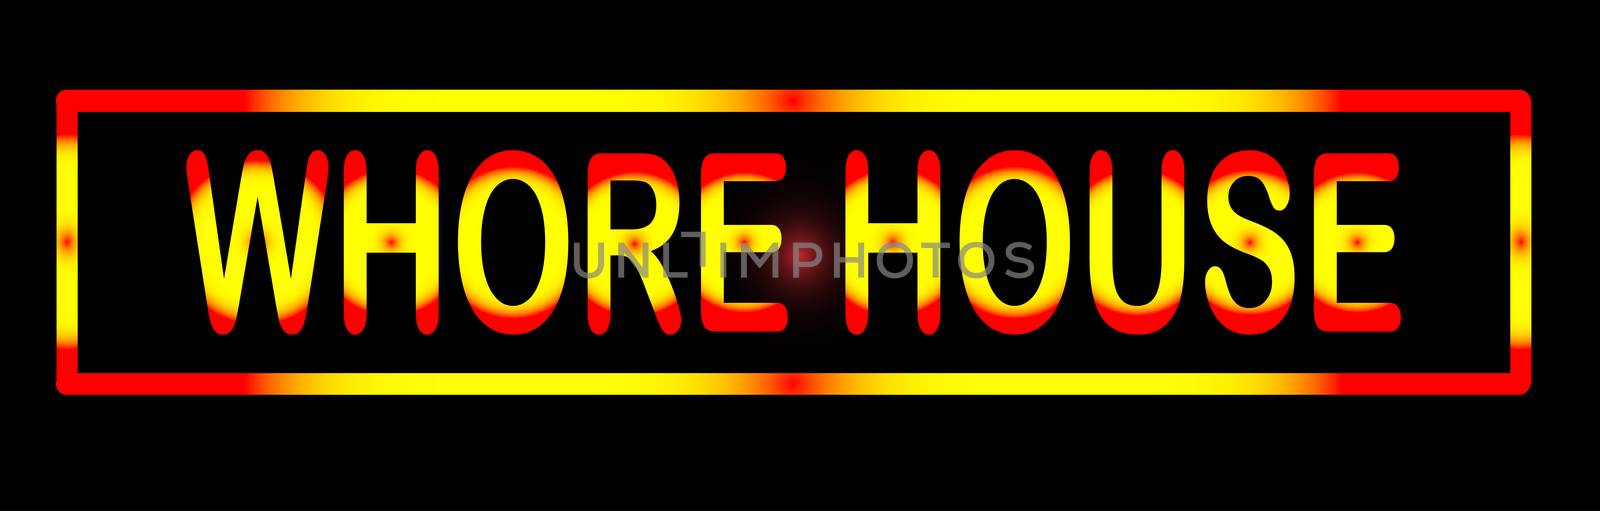 Whore House Sign by Bigalbaloo